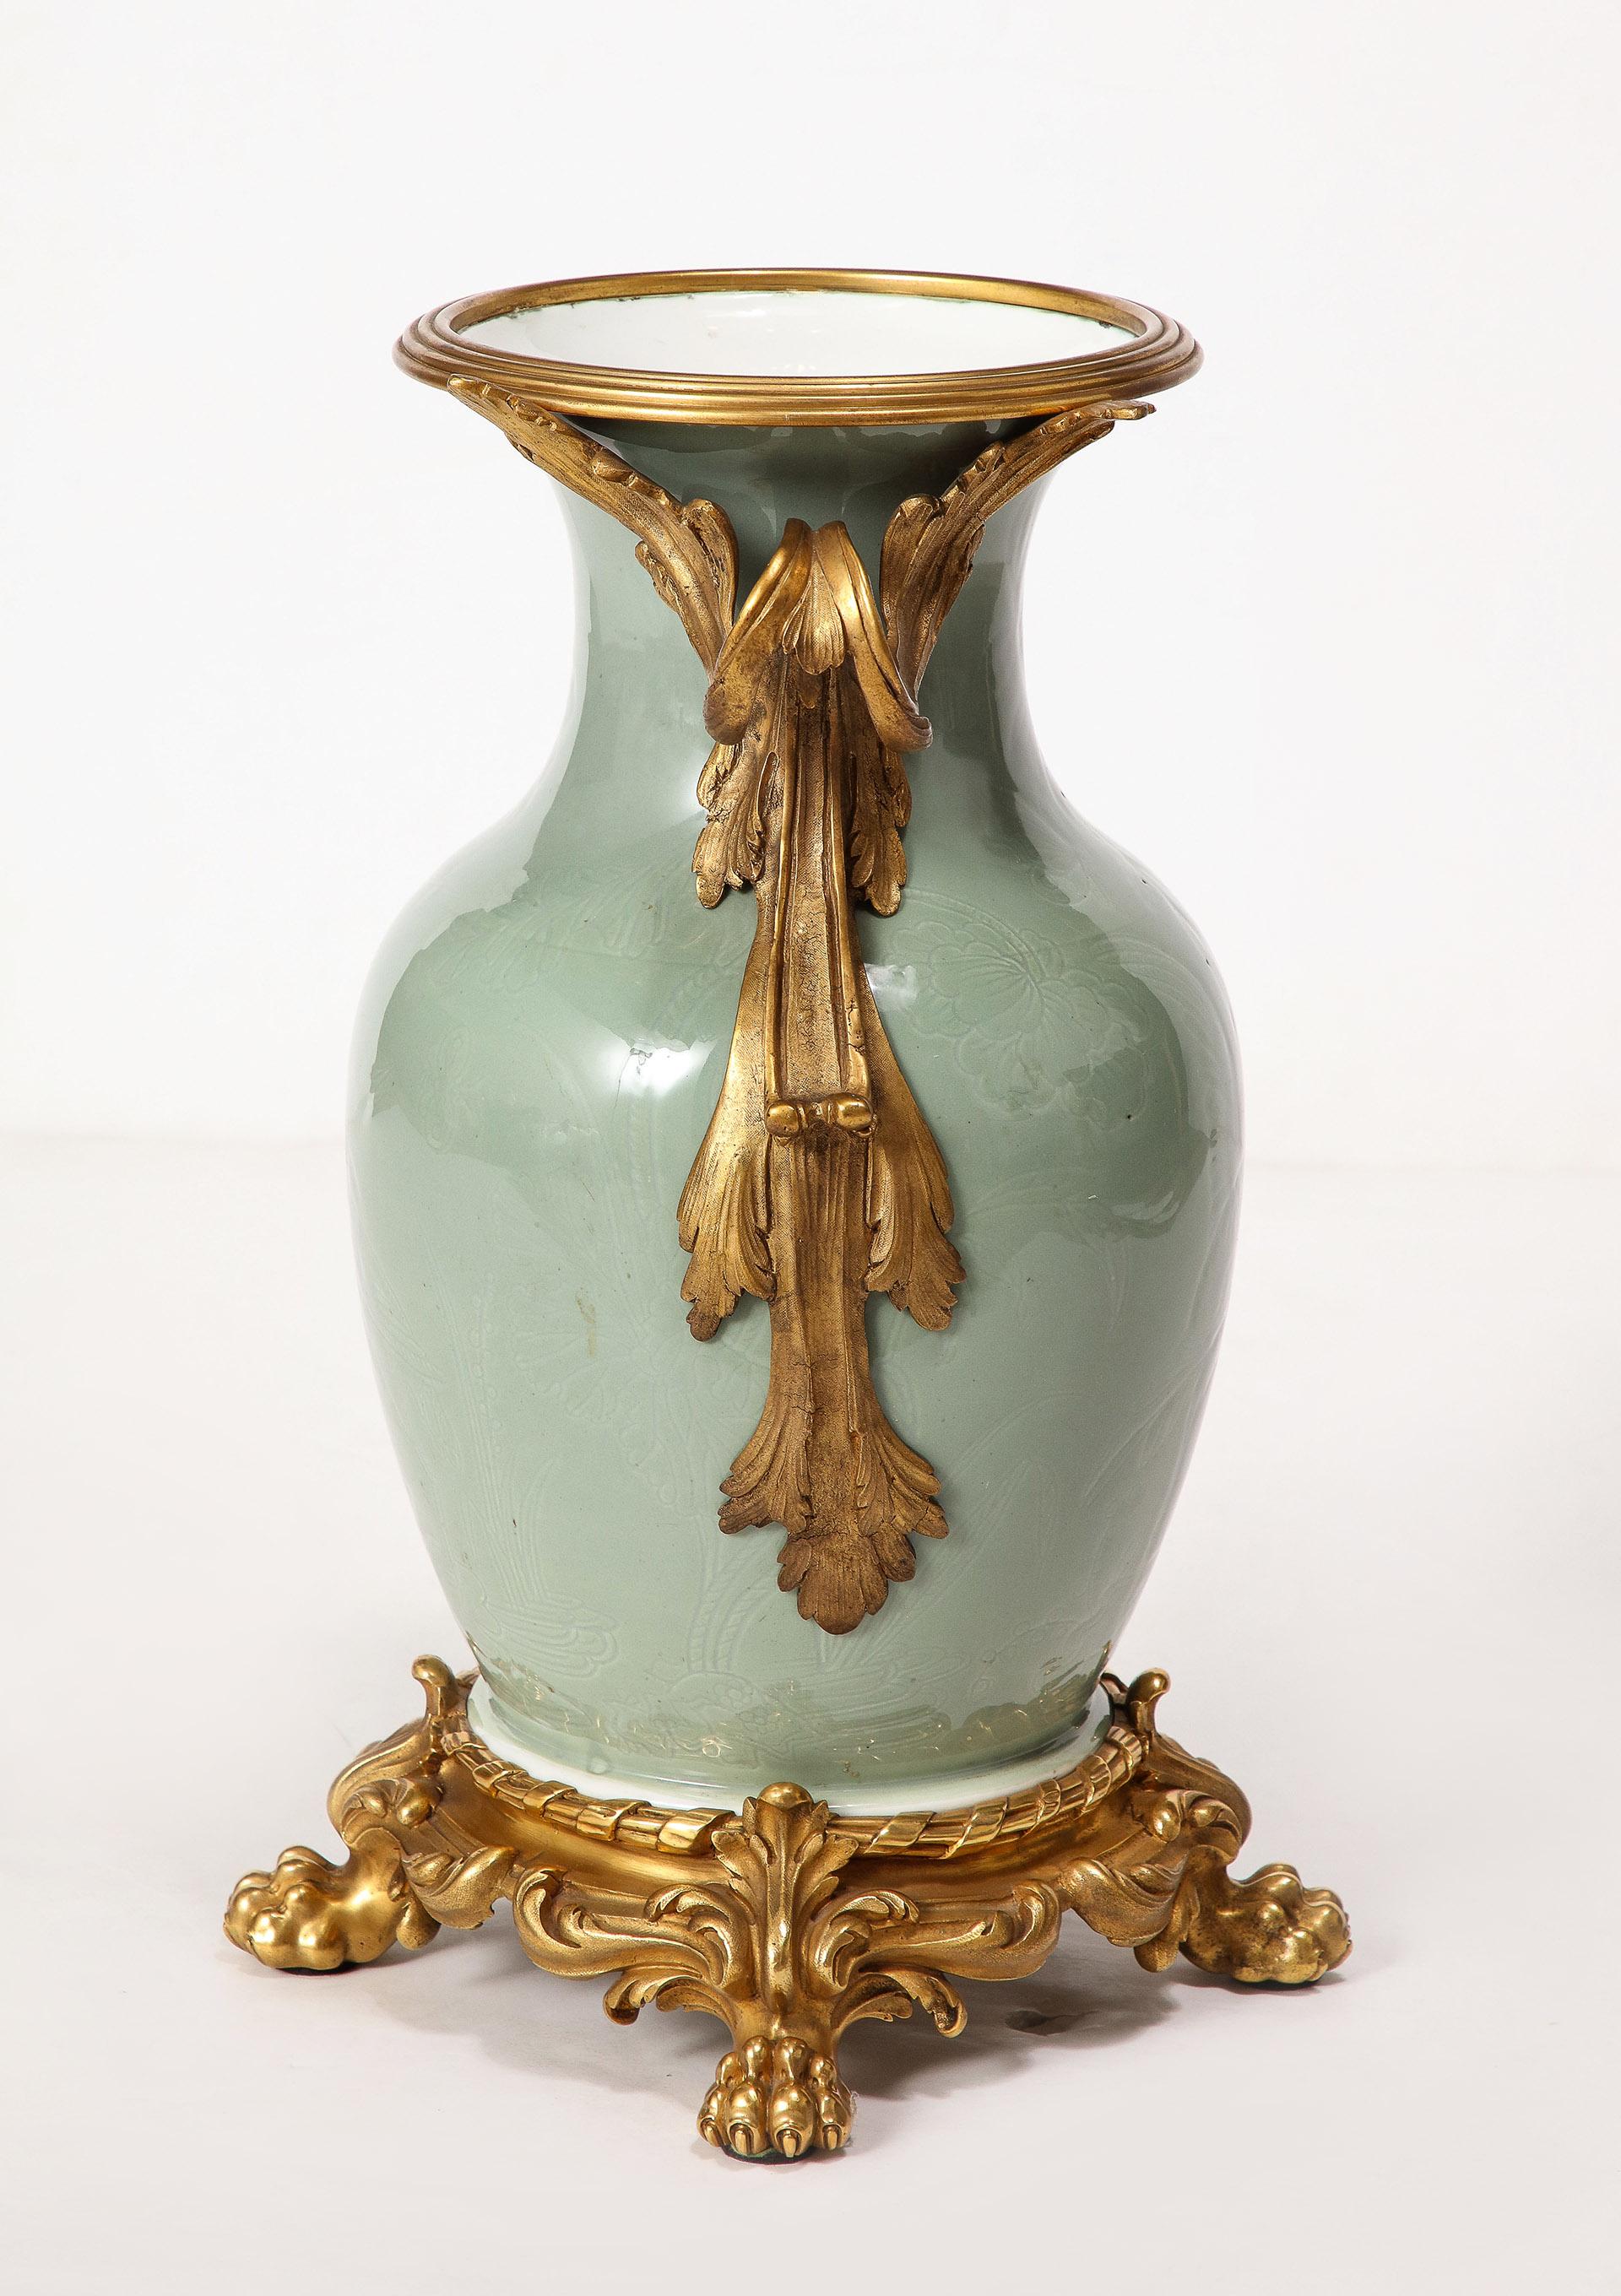 19th Century An Important Pair of French Ormolu-Mounted Chinese Celadon-Glazed Urns For Sale